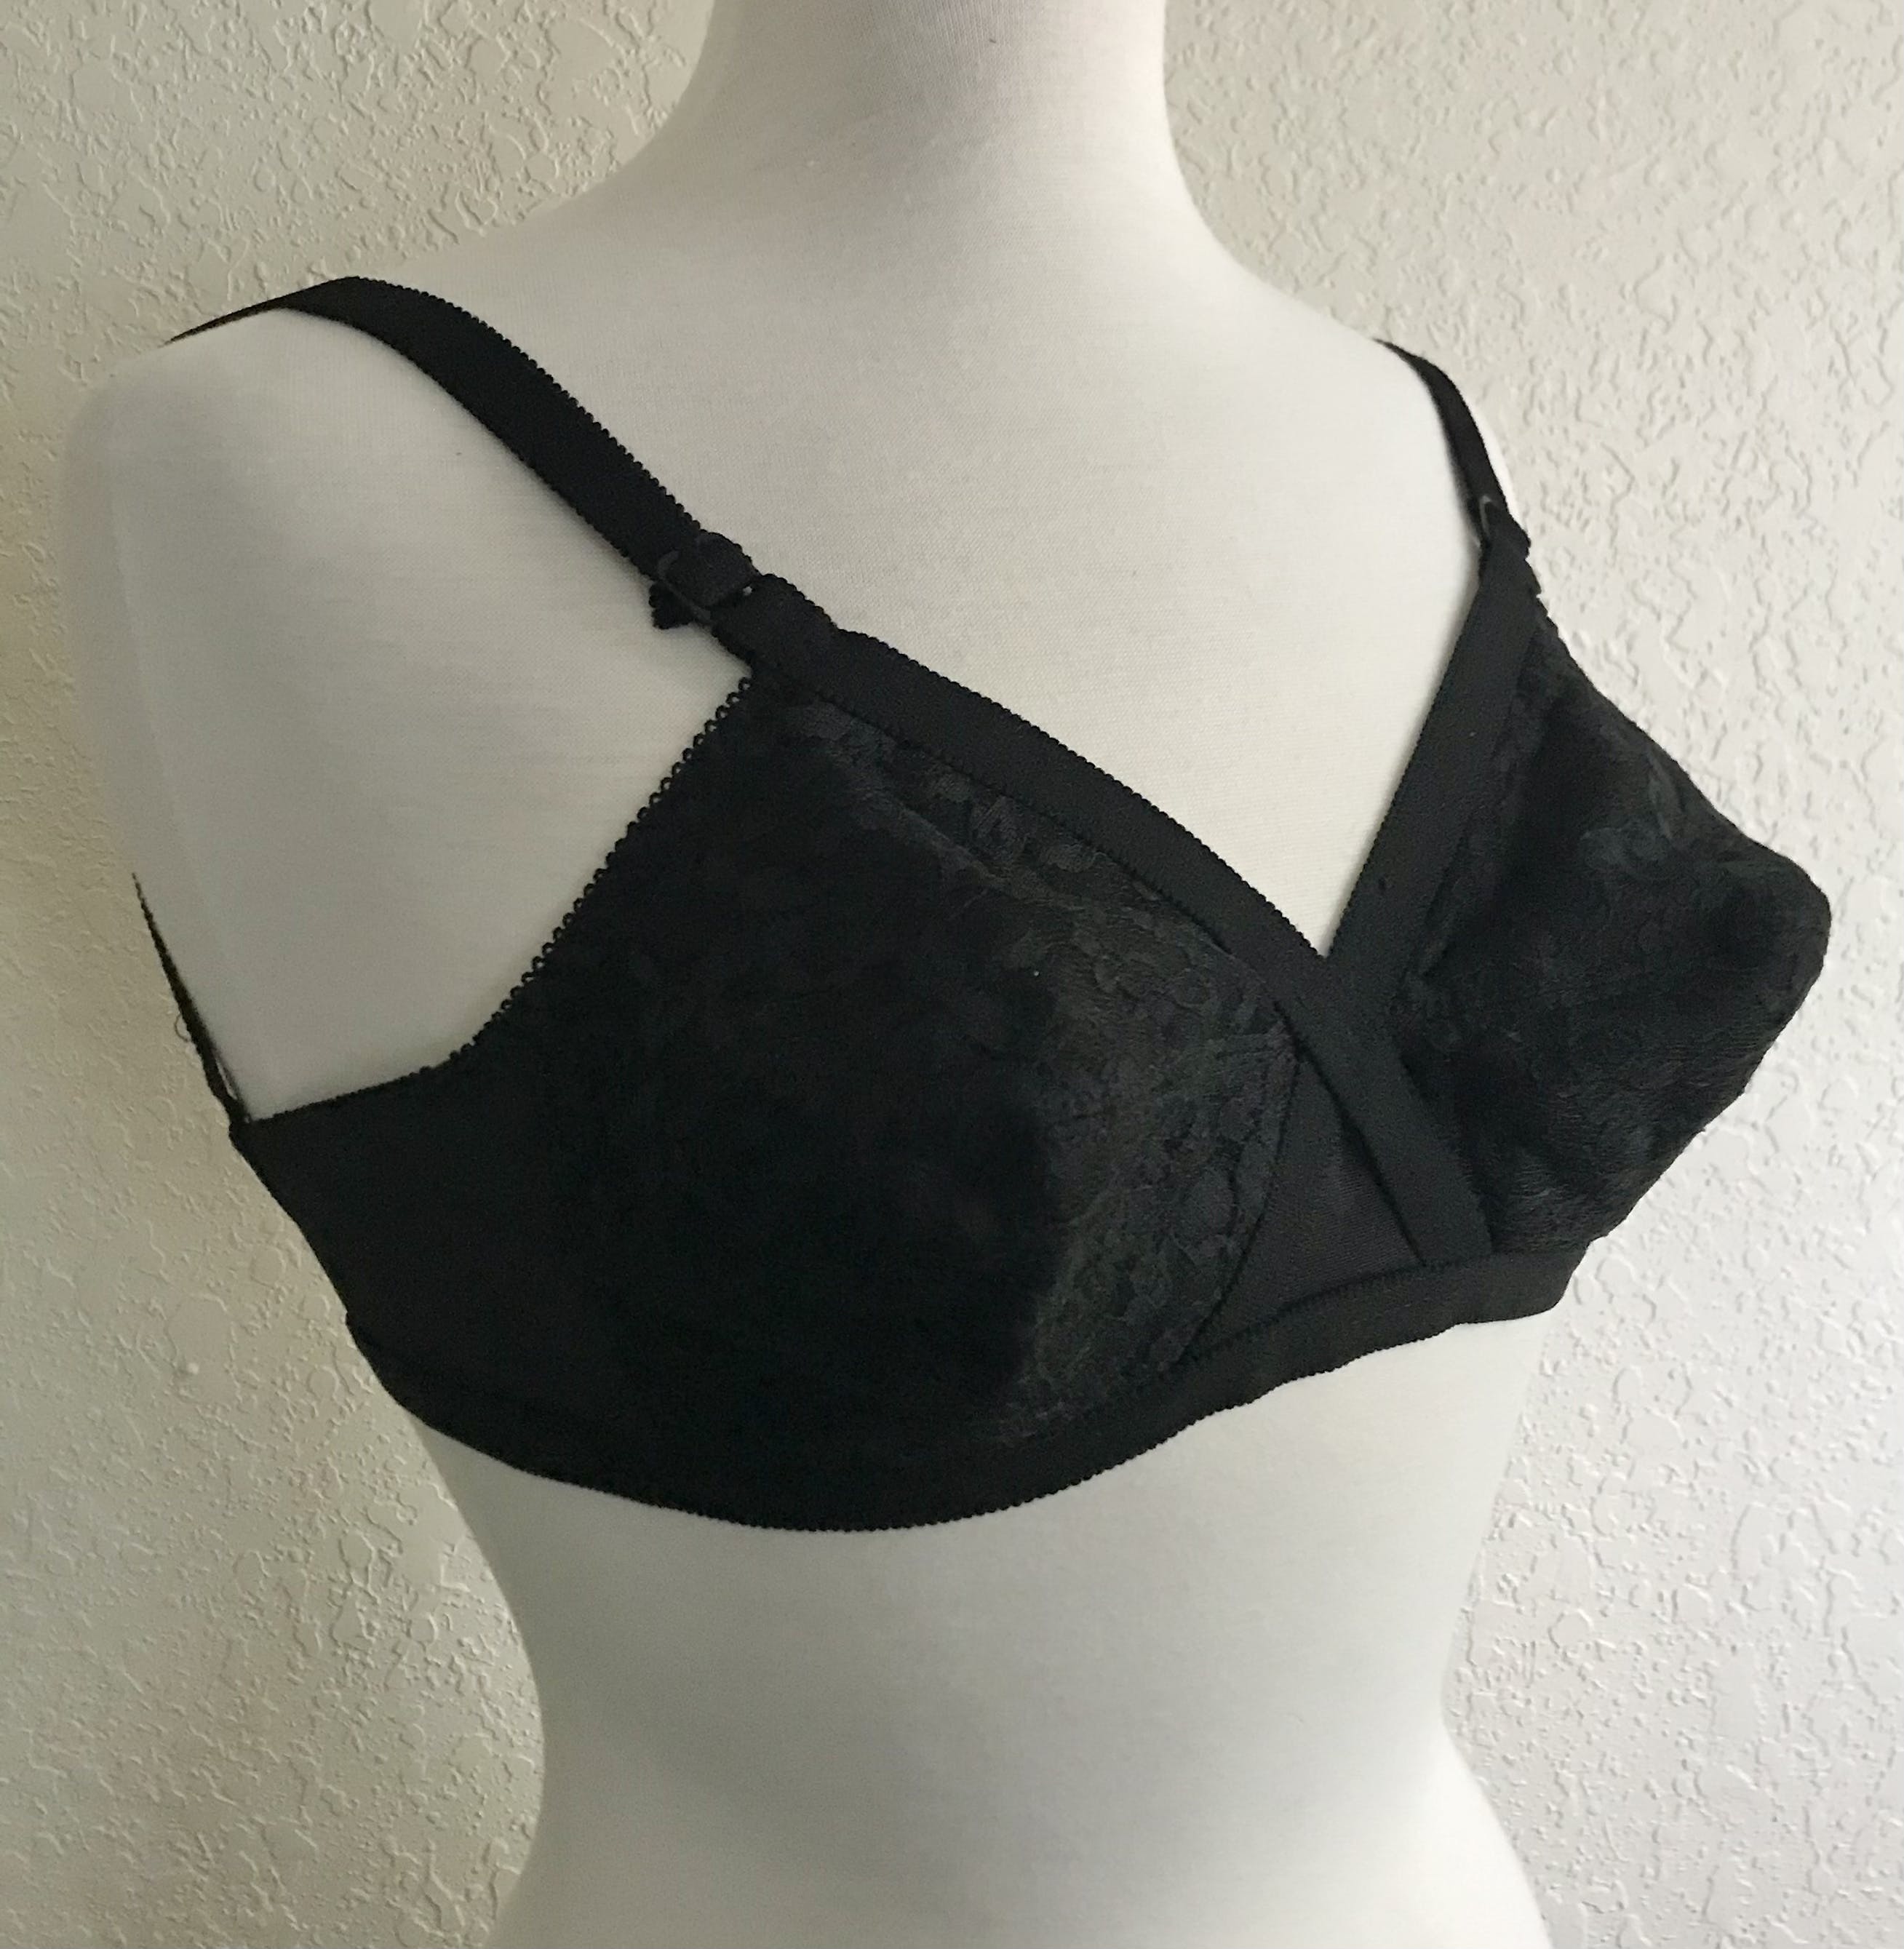 http://shopthrilling.com/cdn/shop/products/70-s-black-lace-bullet-bra-c-cup-by-playtex-by-playtex-product-image__m0hocguhg.jpg?v=1616523684